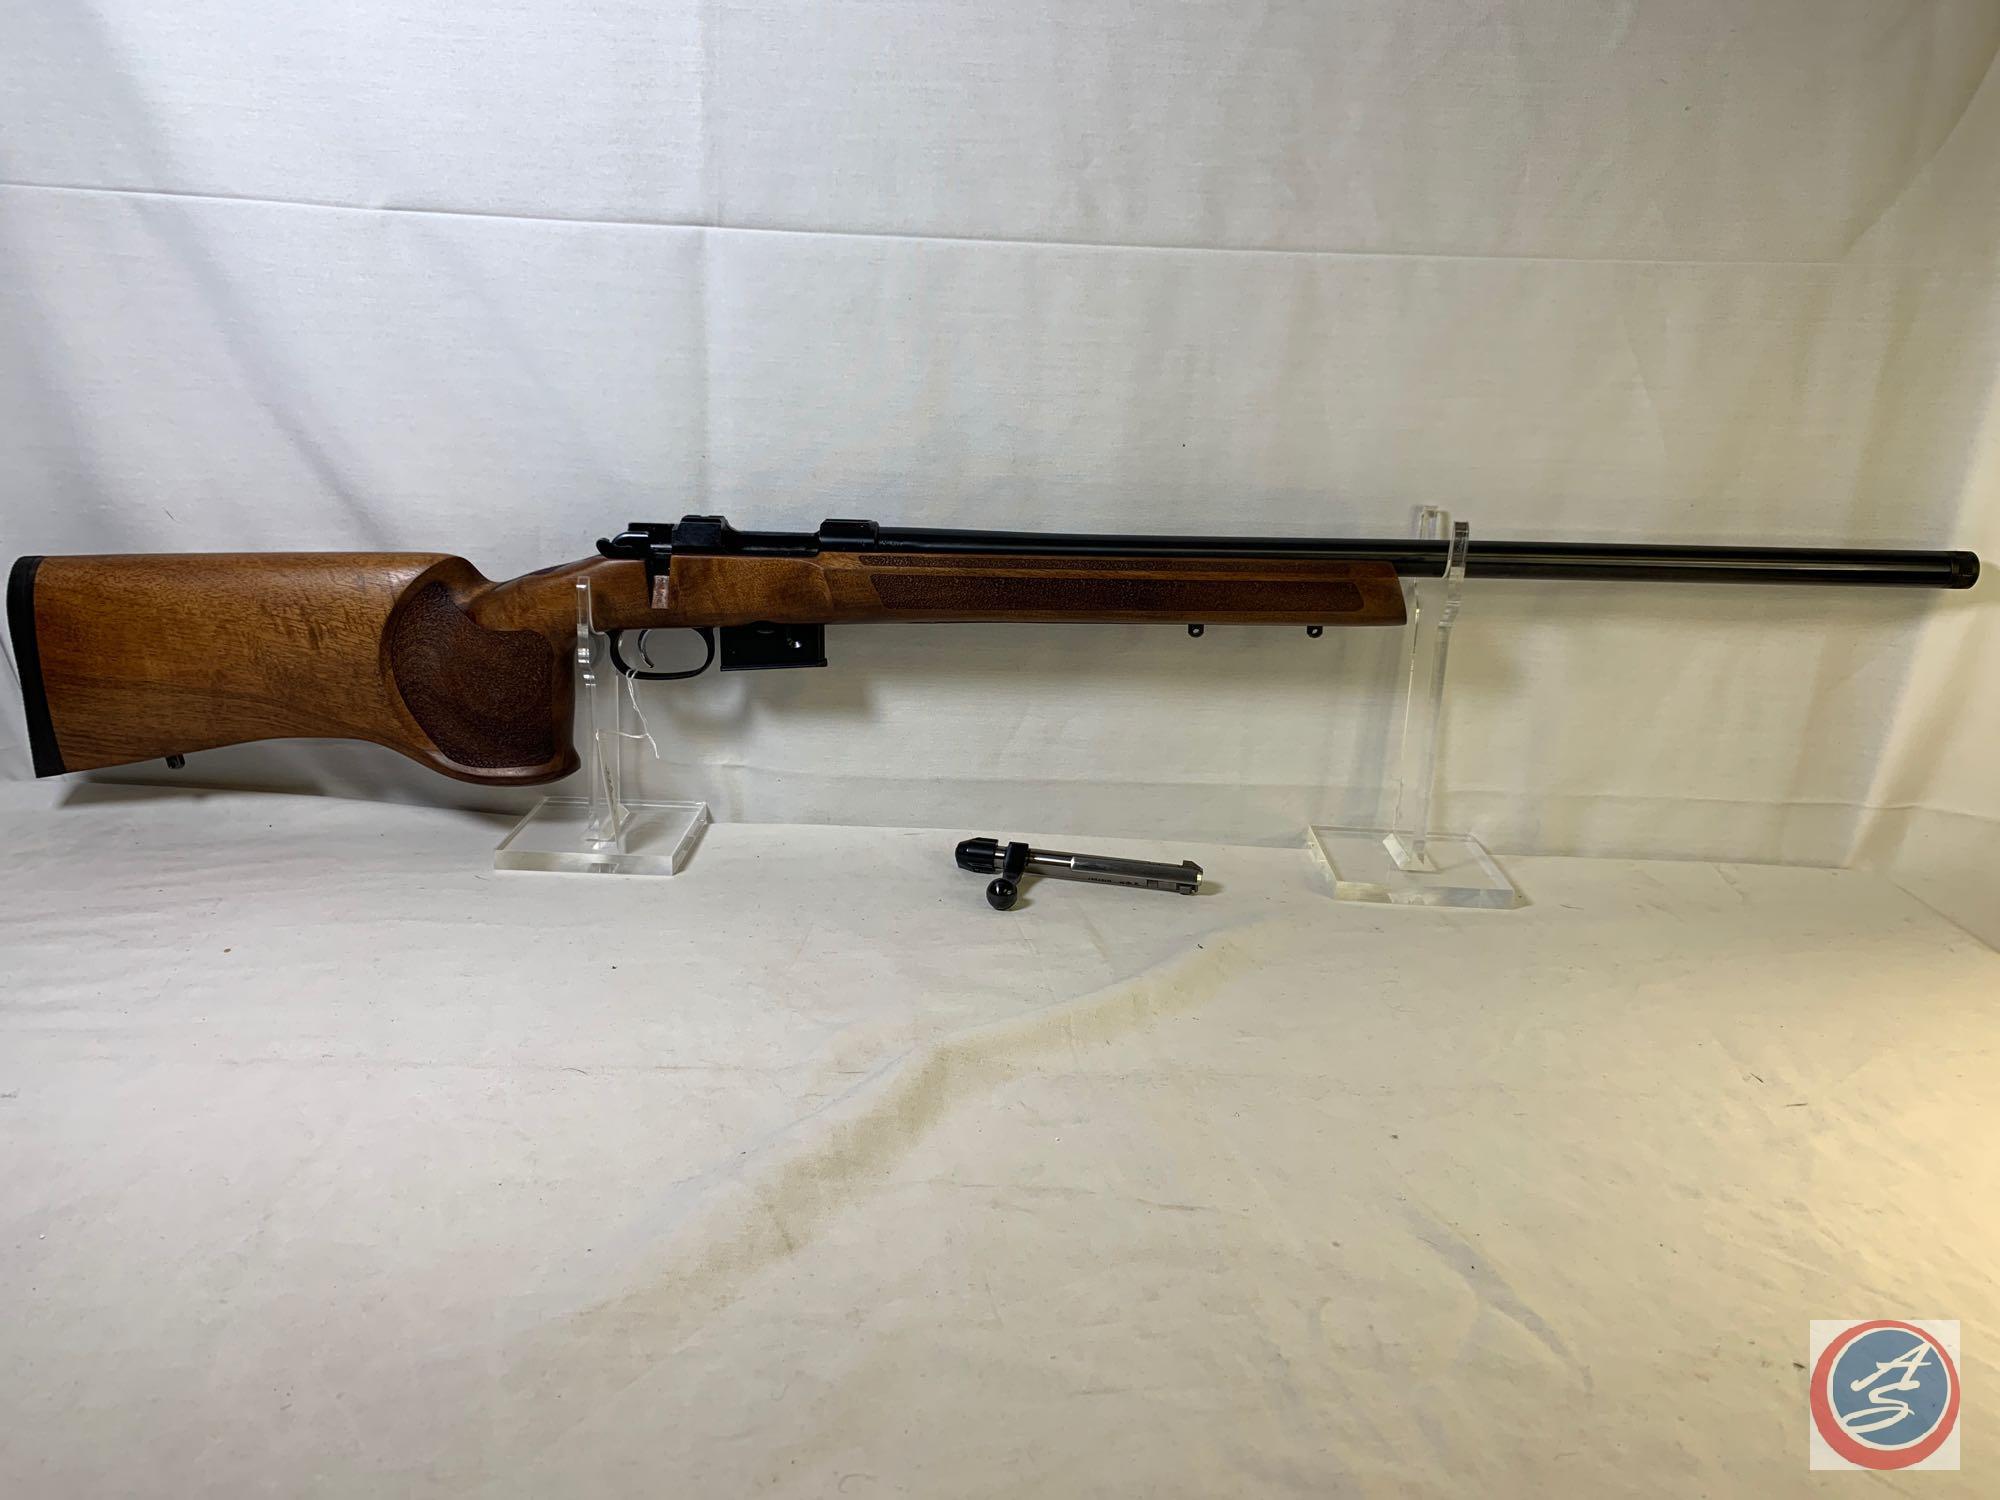 CZ Model 527 MTR 223 Rifle Match Target Rifle w/ 1 Magazine, Rings, Factory Box and Manual Tuned to